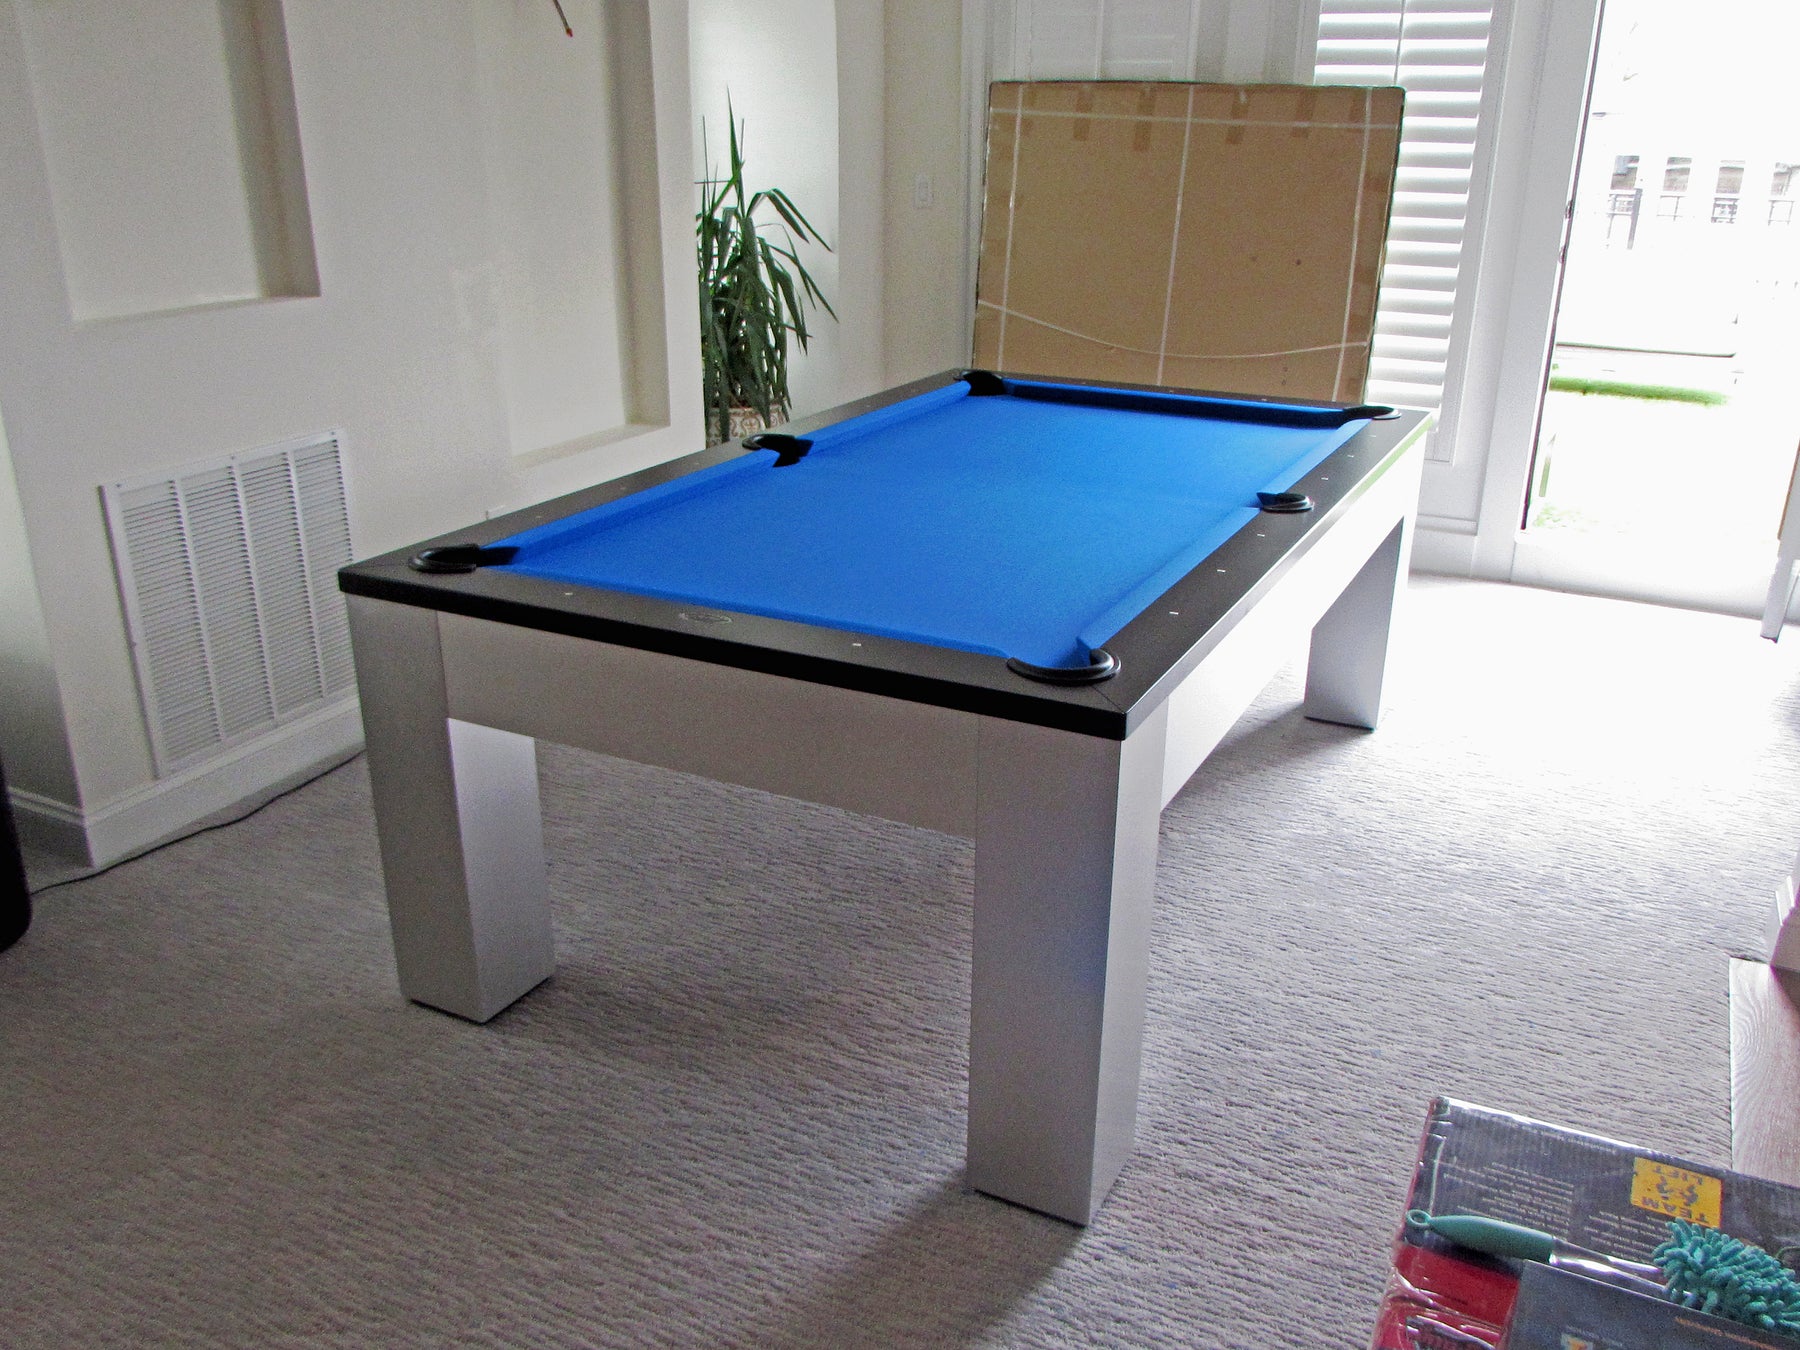 Olhausen Madison Pool Table installed in Rockville Maryland